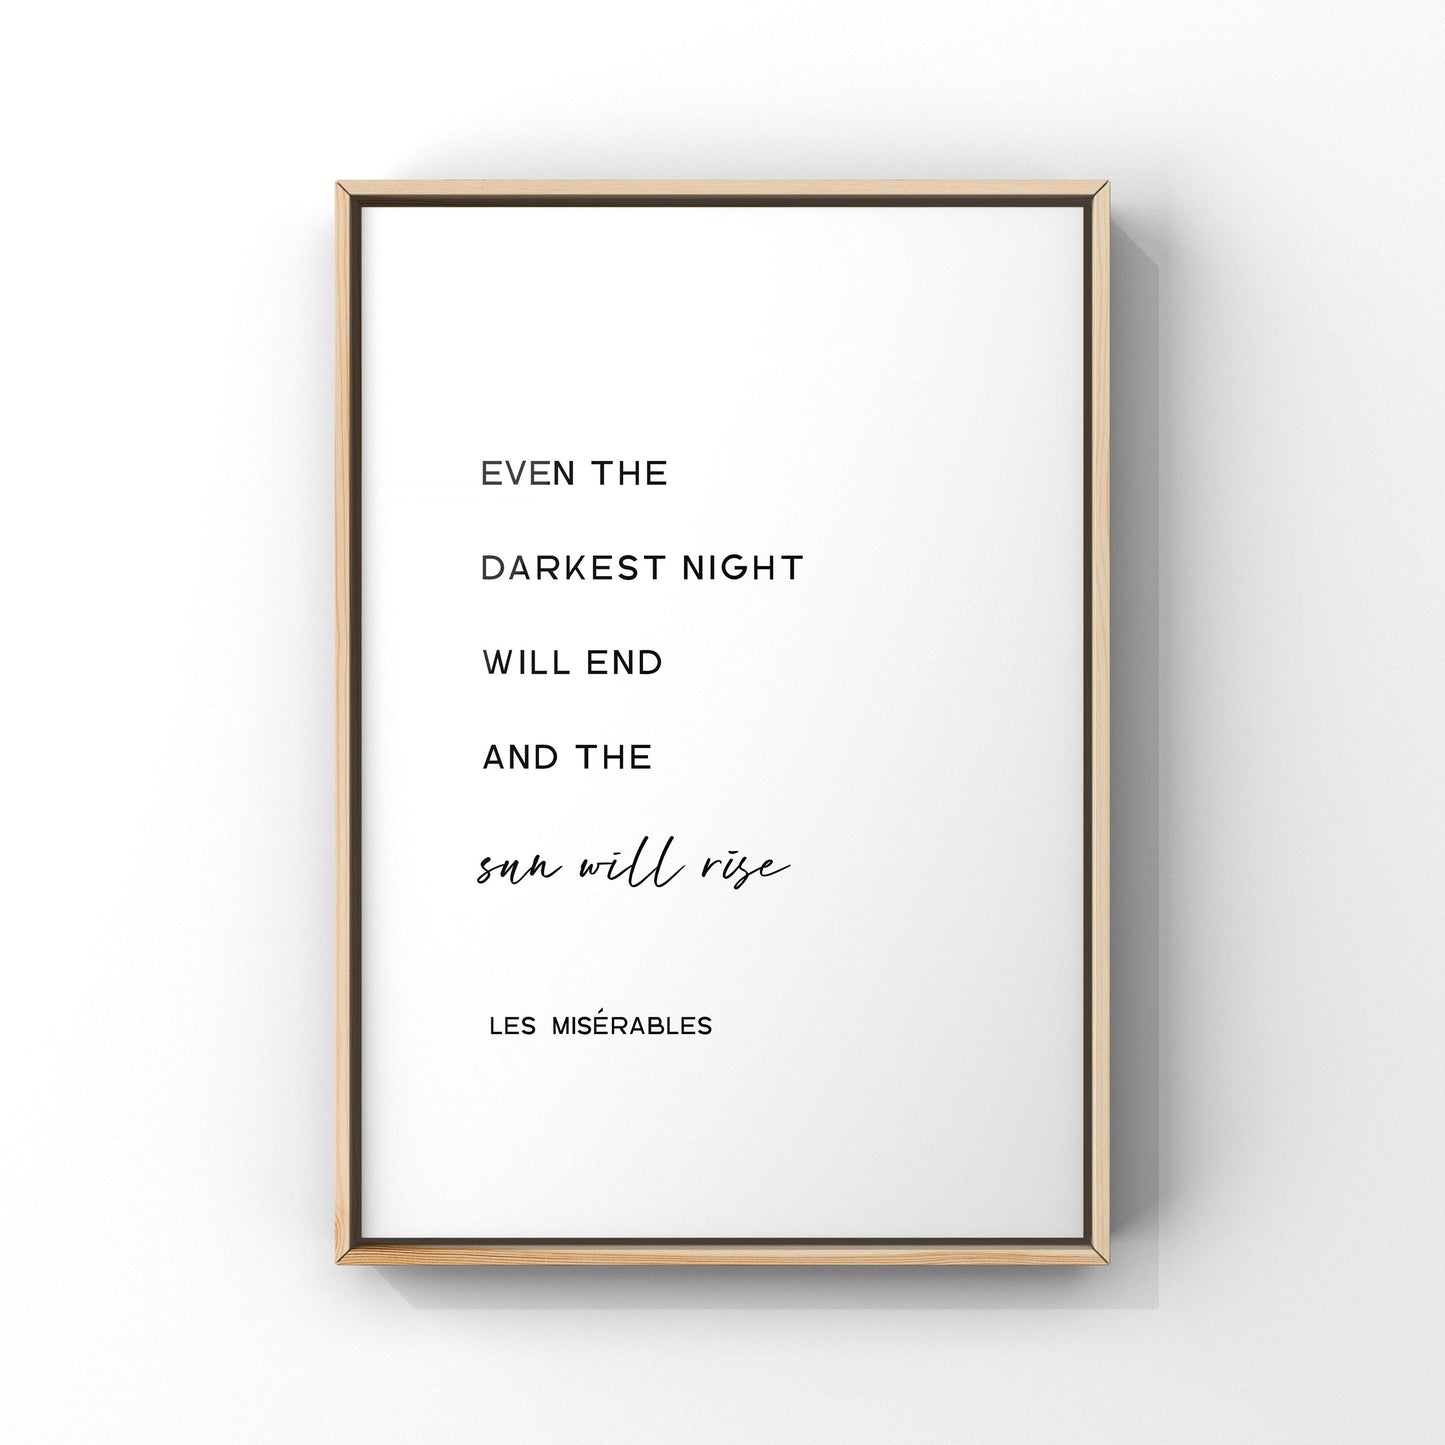 Even the darkest night will end and the sun will rise, Les Miserables quote print, Les Mis, Victor Hugo, Motivational quote, Inspirational